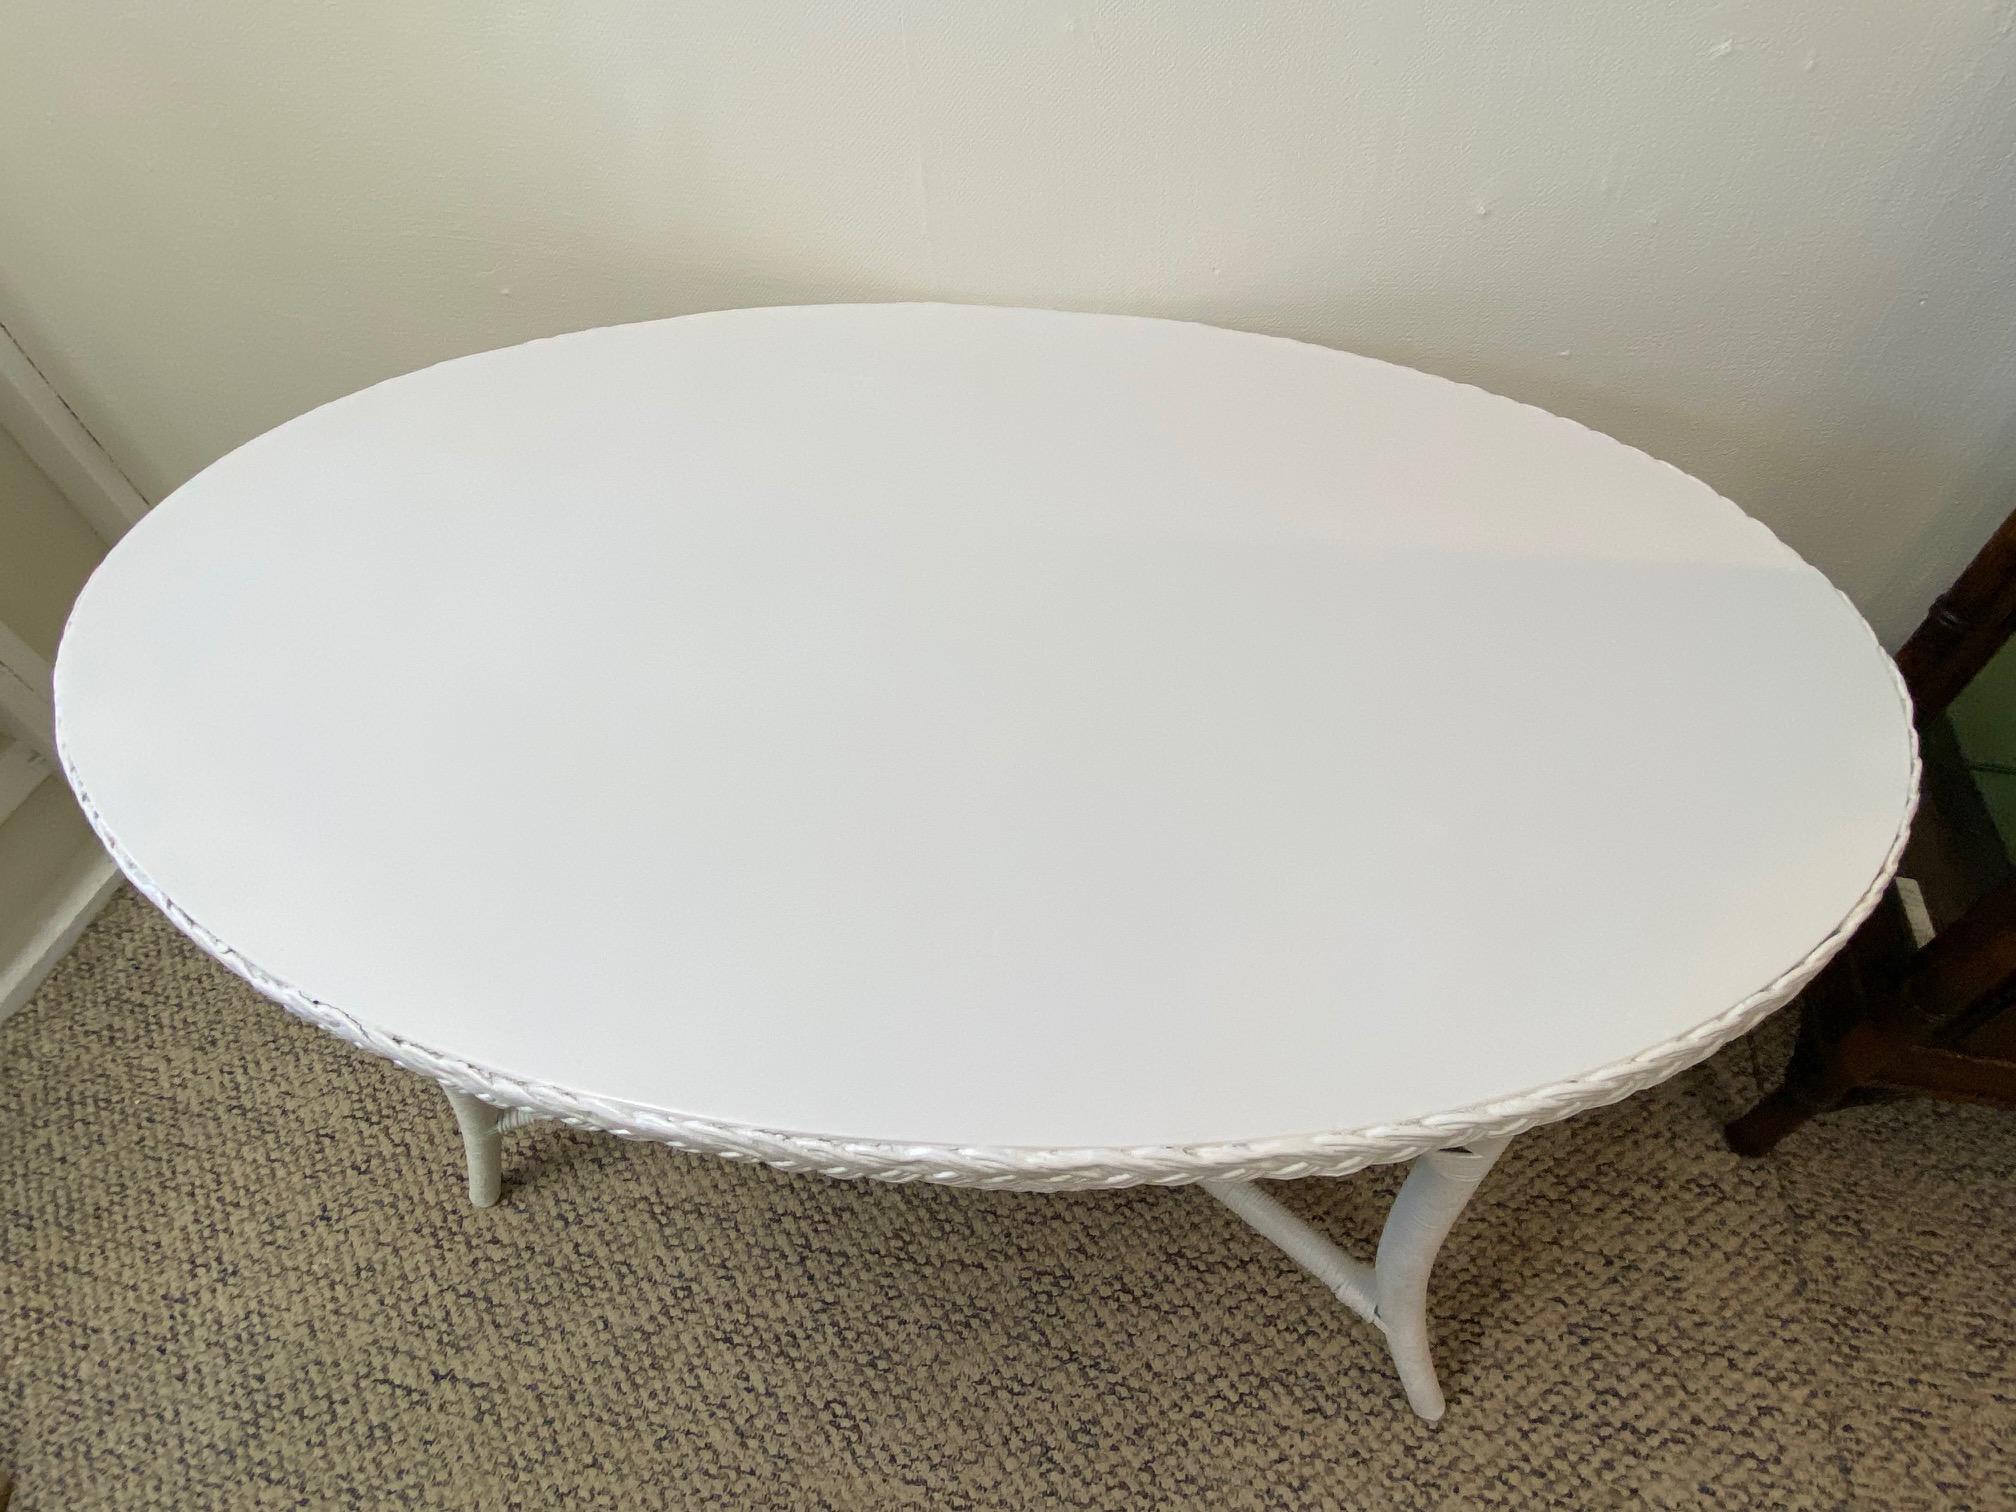 Early 20th Century Vintage American Wicker Company White Painted Oval Dining Table For Sale